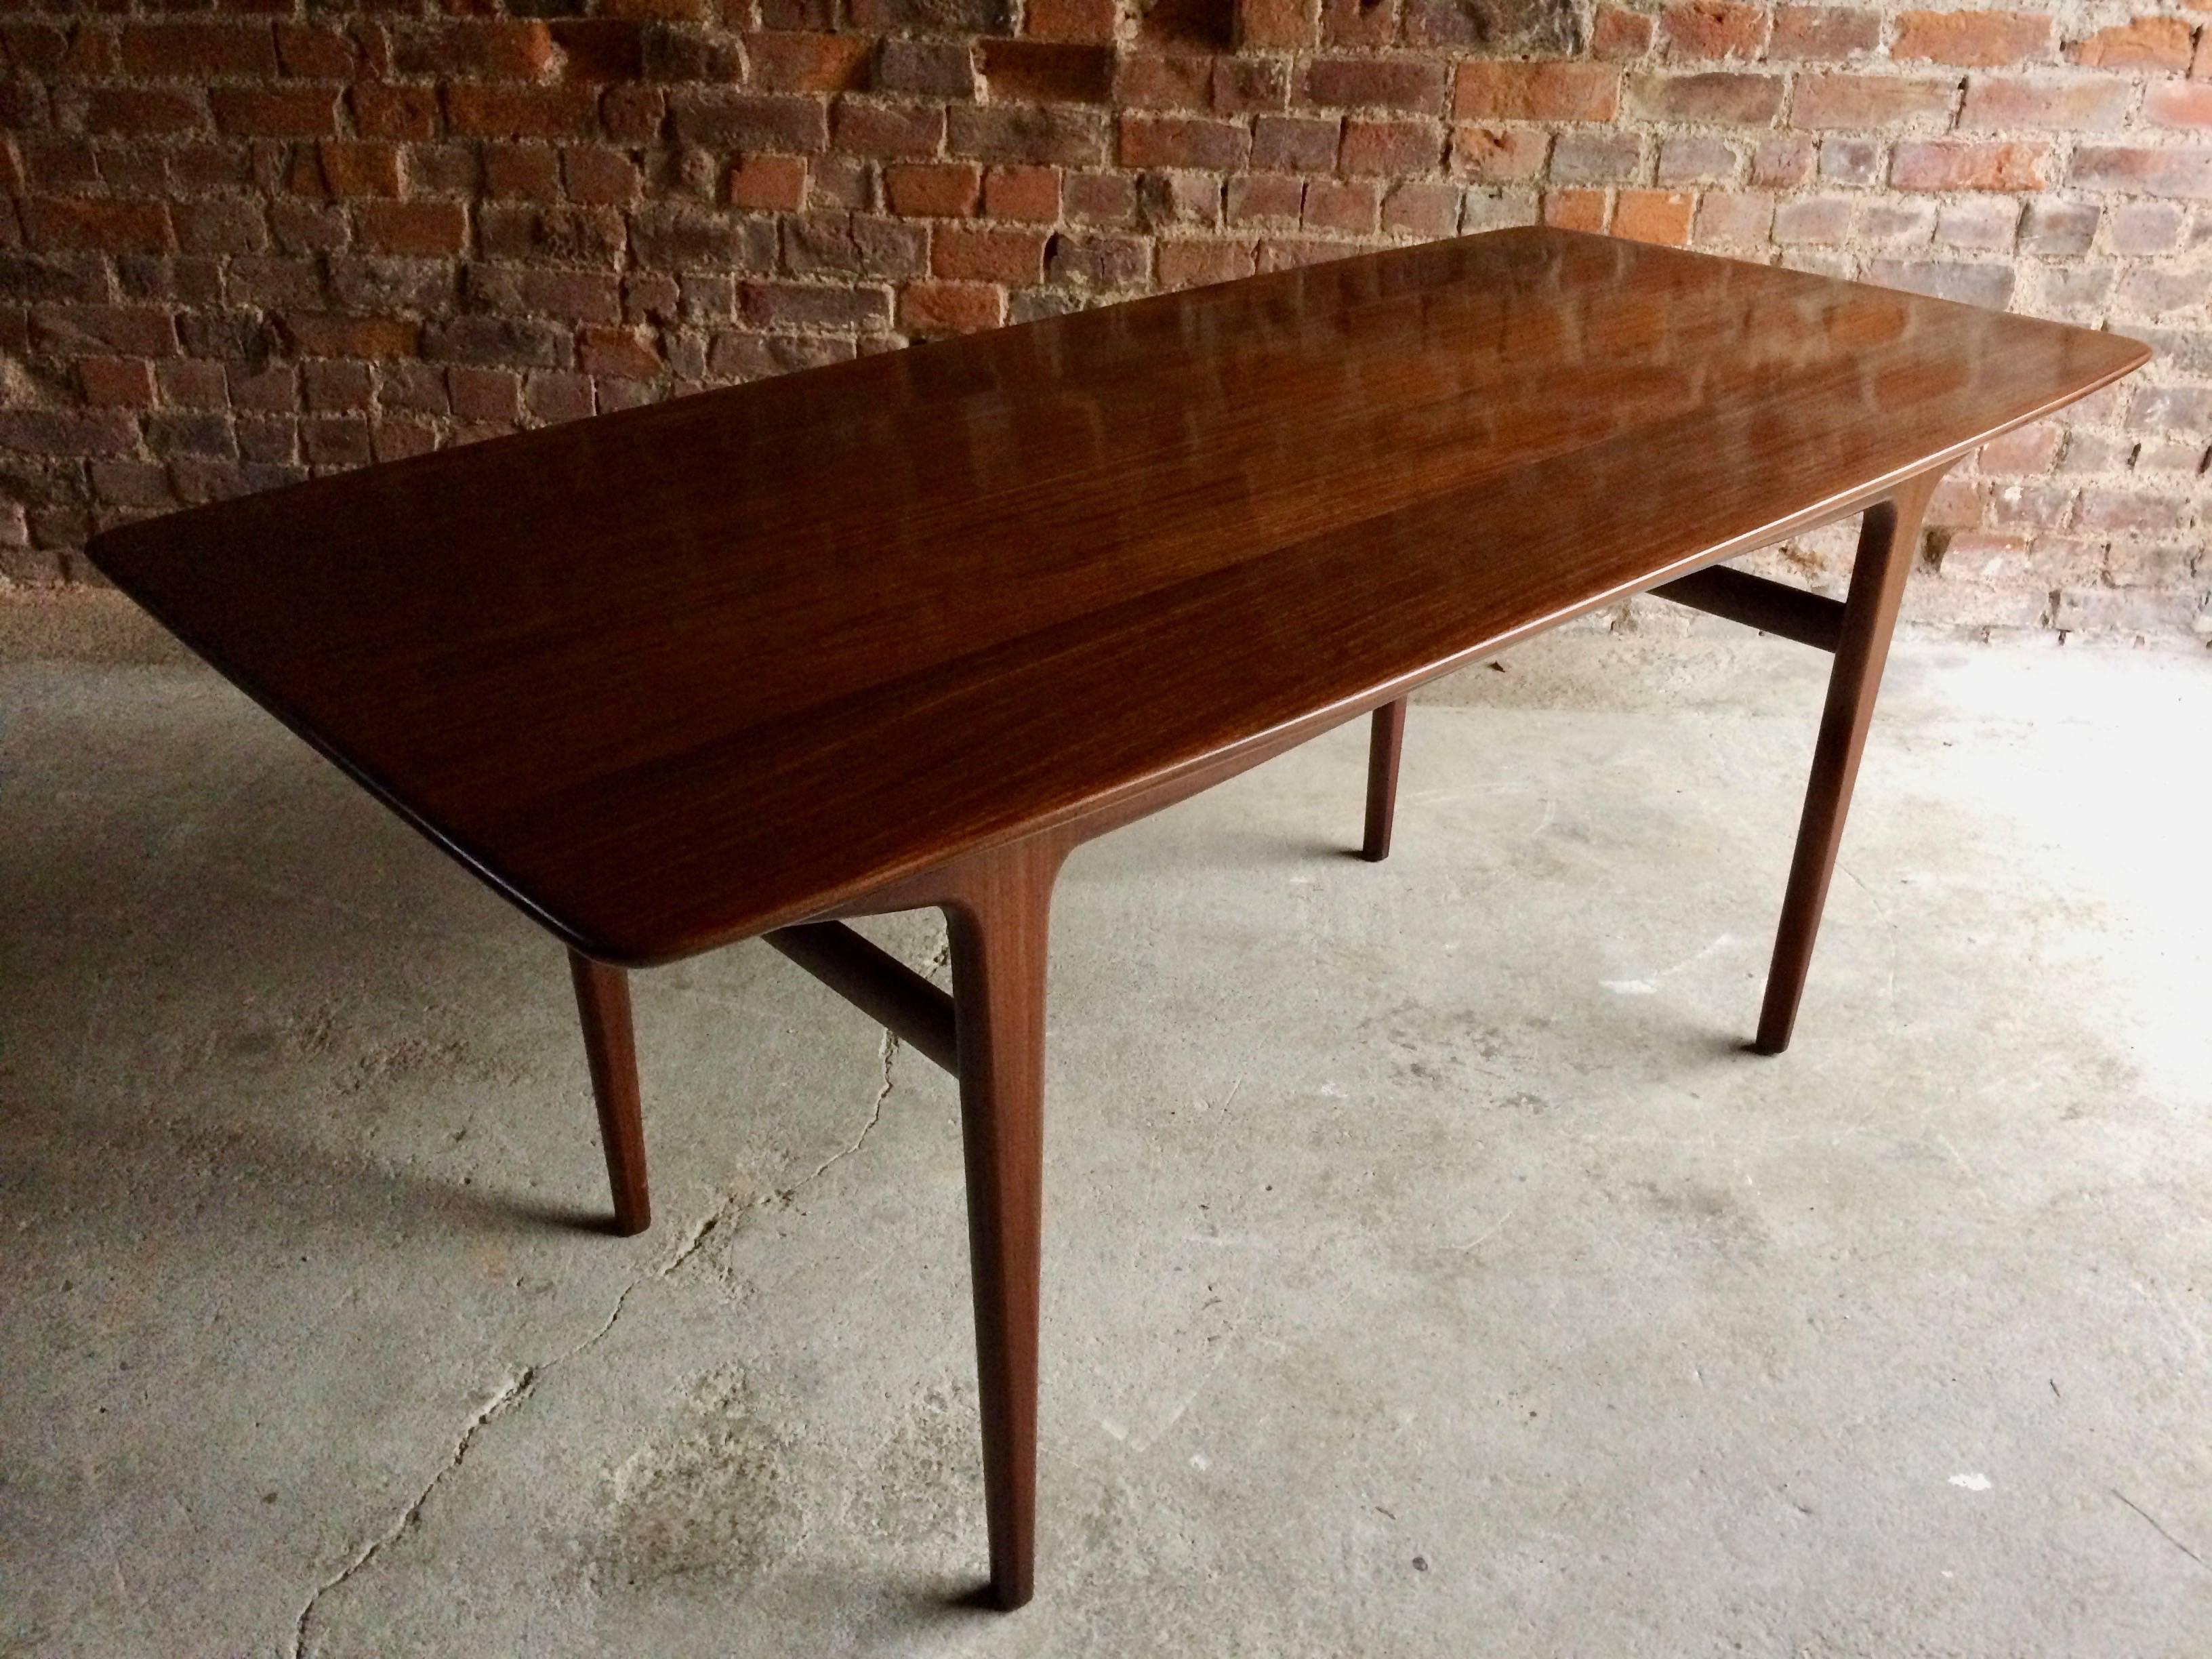 A magnificent midcentury Teak dining table by Danish designer Niels Otto Møller, and manufactured by JL Møllers Møbelfabrik circa 1960, this table has been completely refurbished and is offered as new.

Niels Otto Møller
JL Møllers